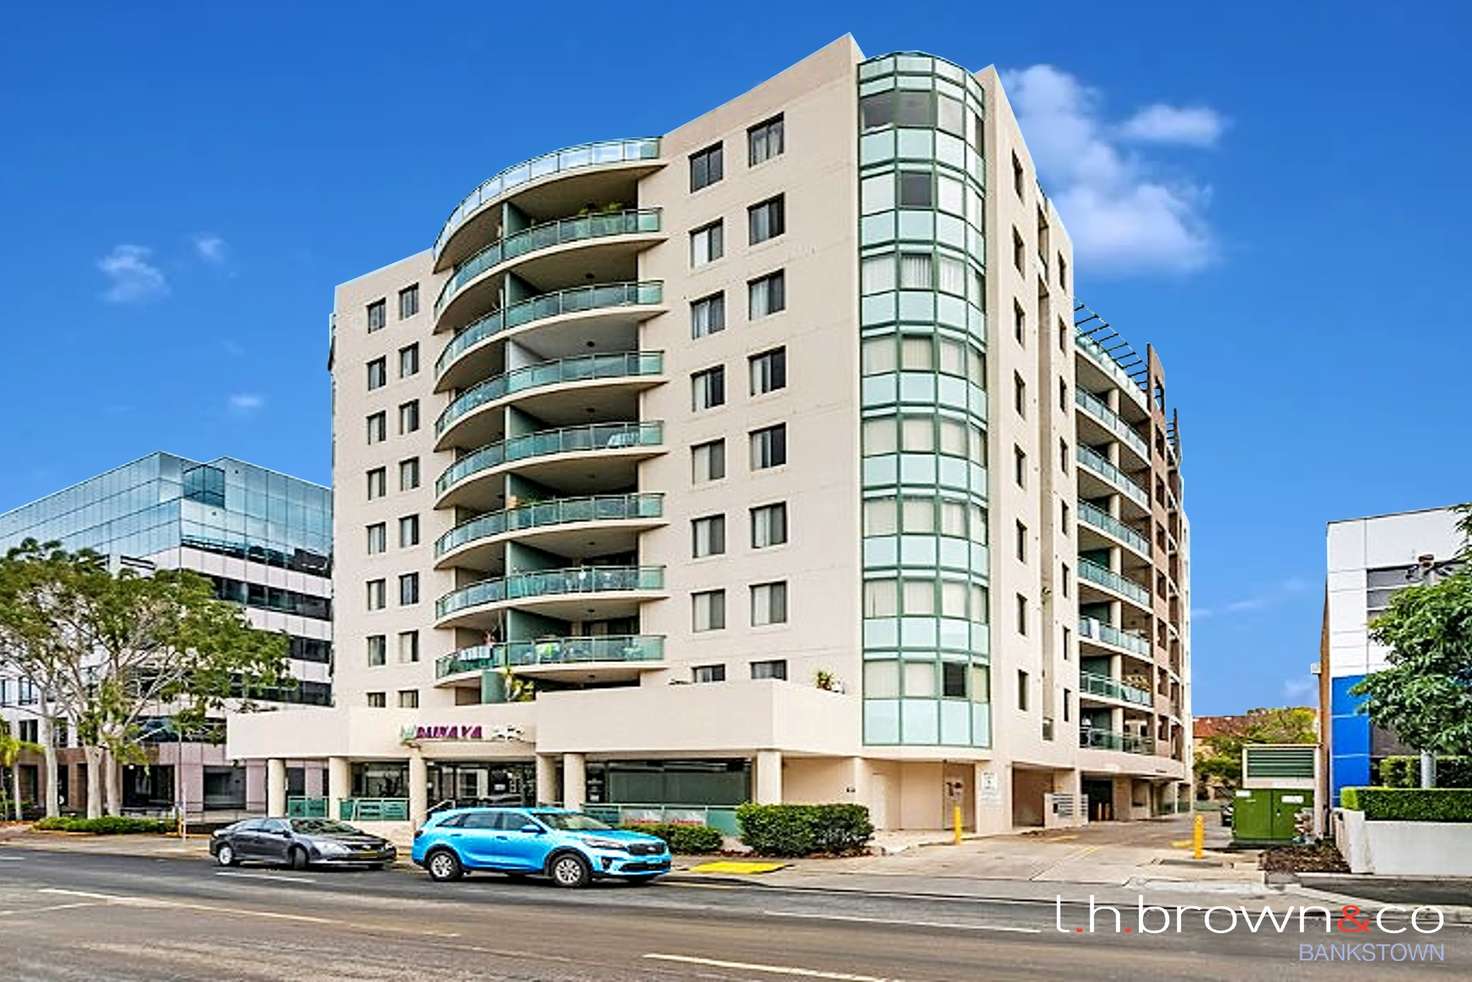 Main view of Homely apartment listing, Unit 505/16-20 Meredith St, Bankstown NSW 2200